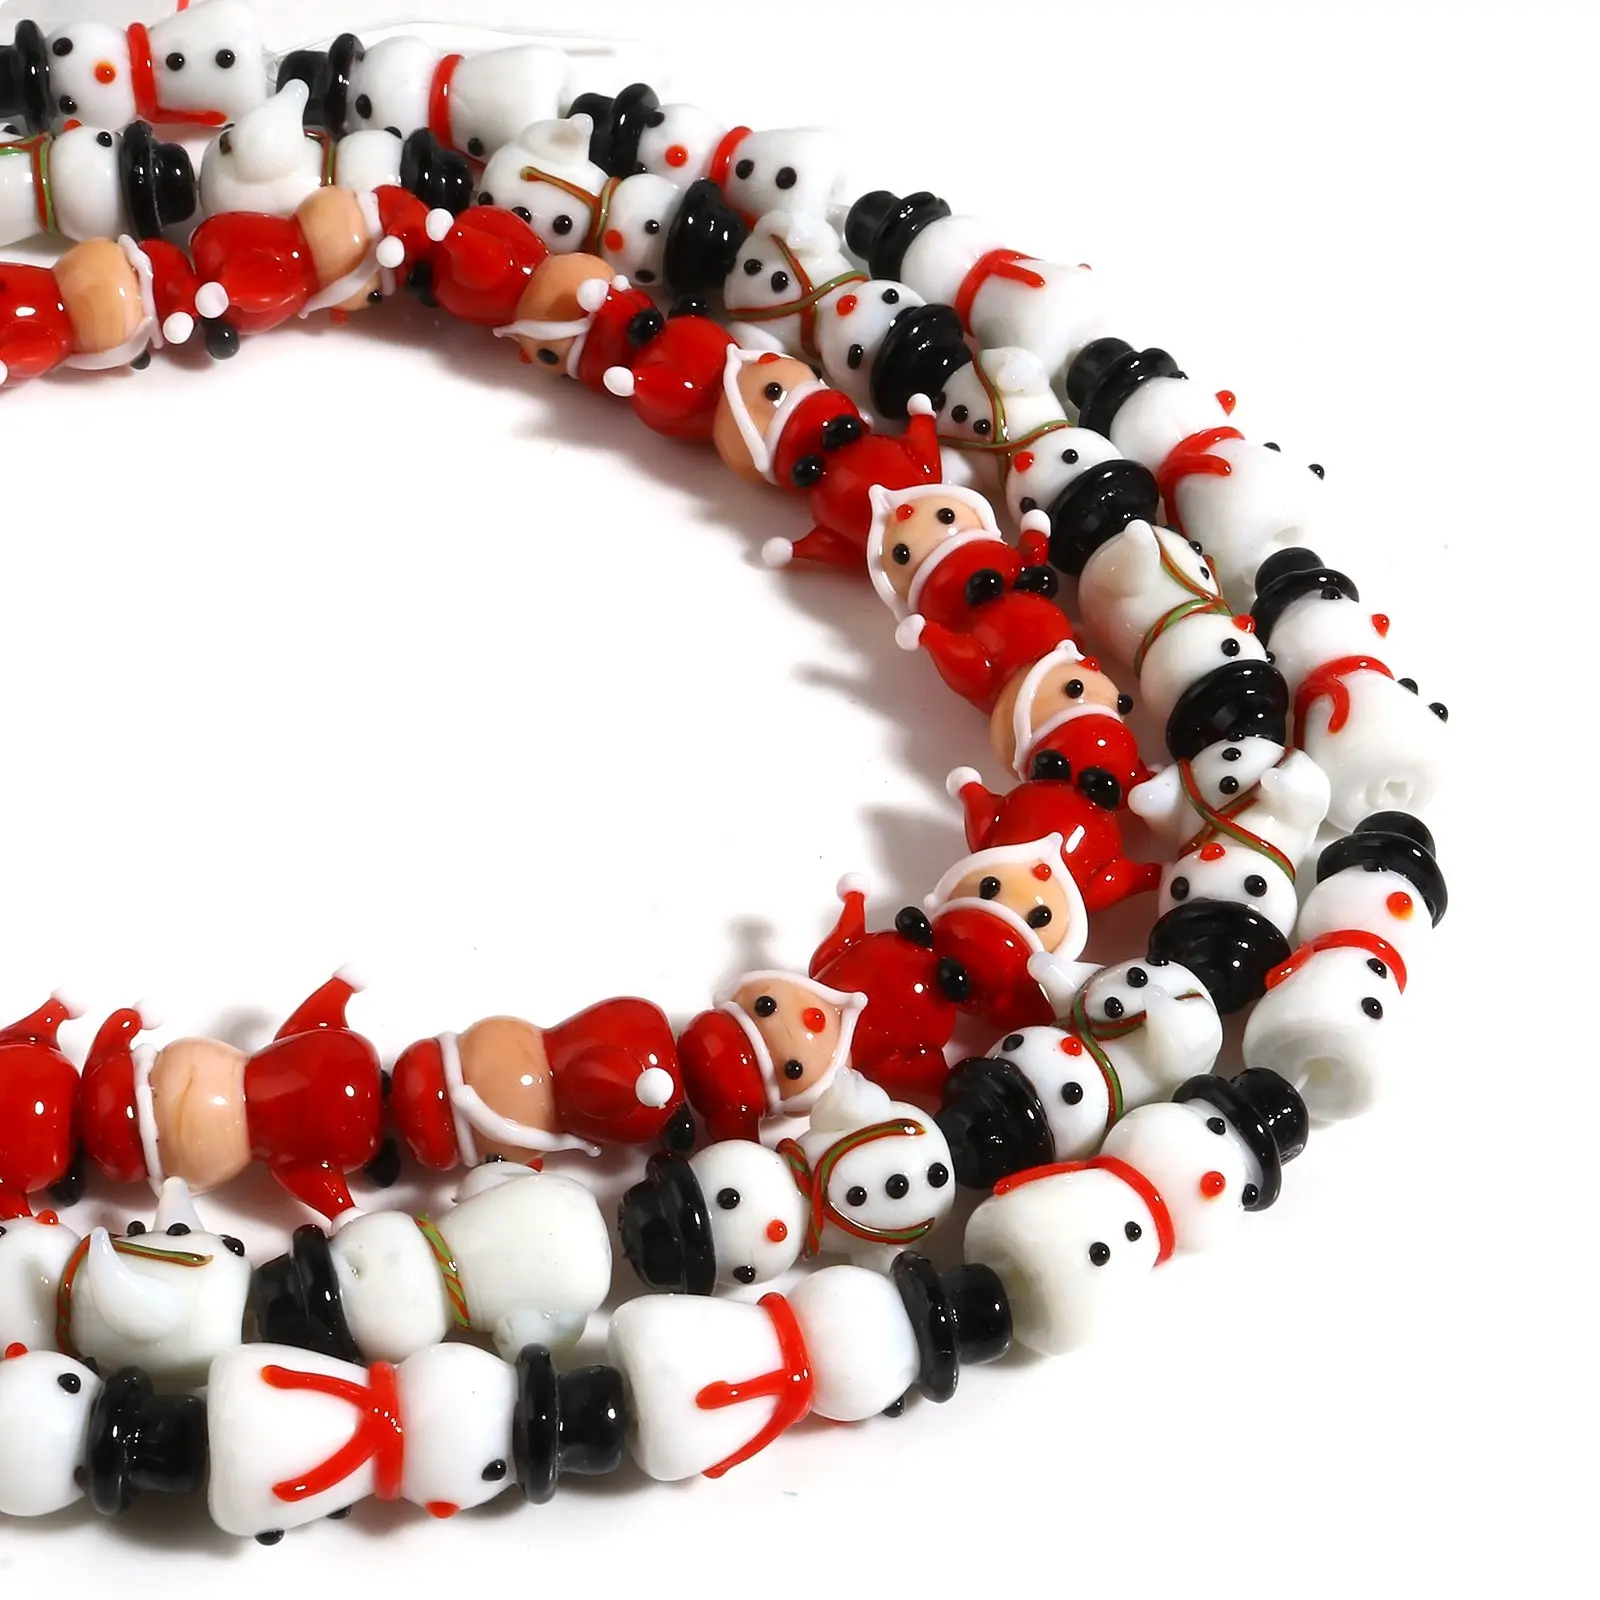 

2 PCs Lampwork Glass Beads Christmas Snowman Santa Claus Red Black White Loose Spacer Beads DIY Making Necklace Women Jewelry